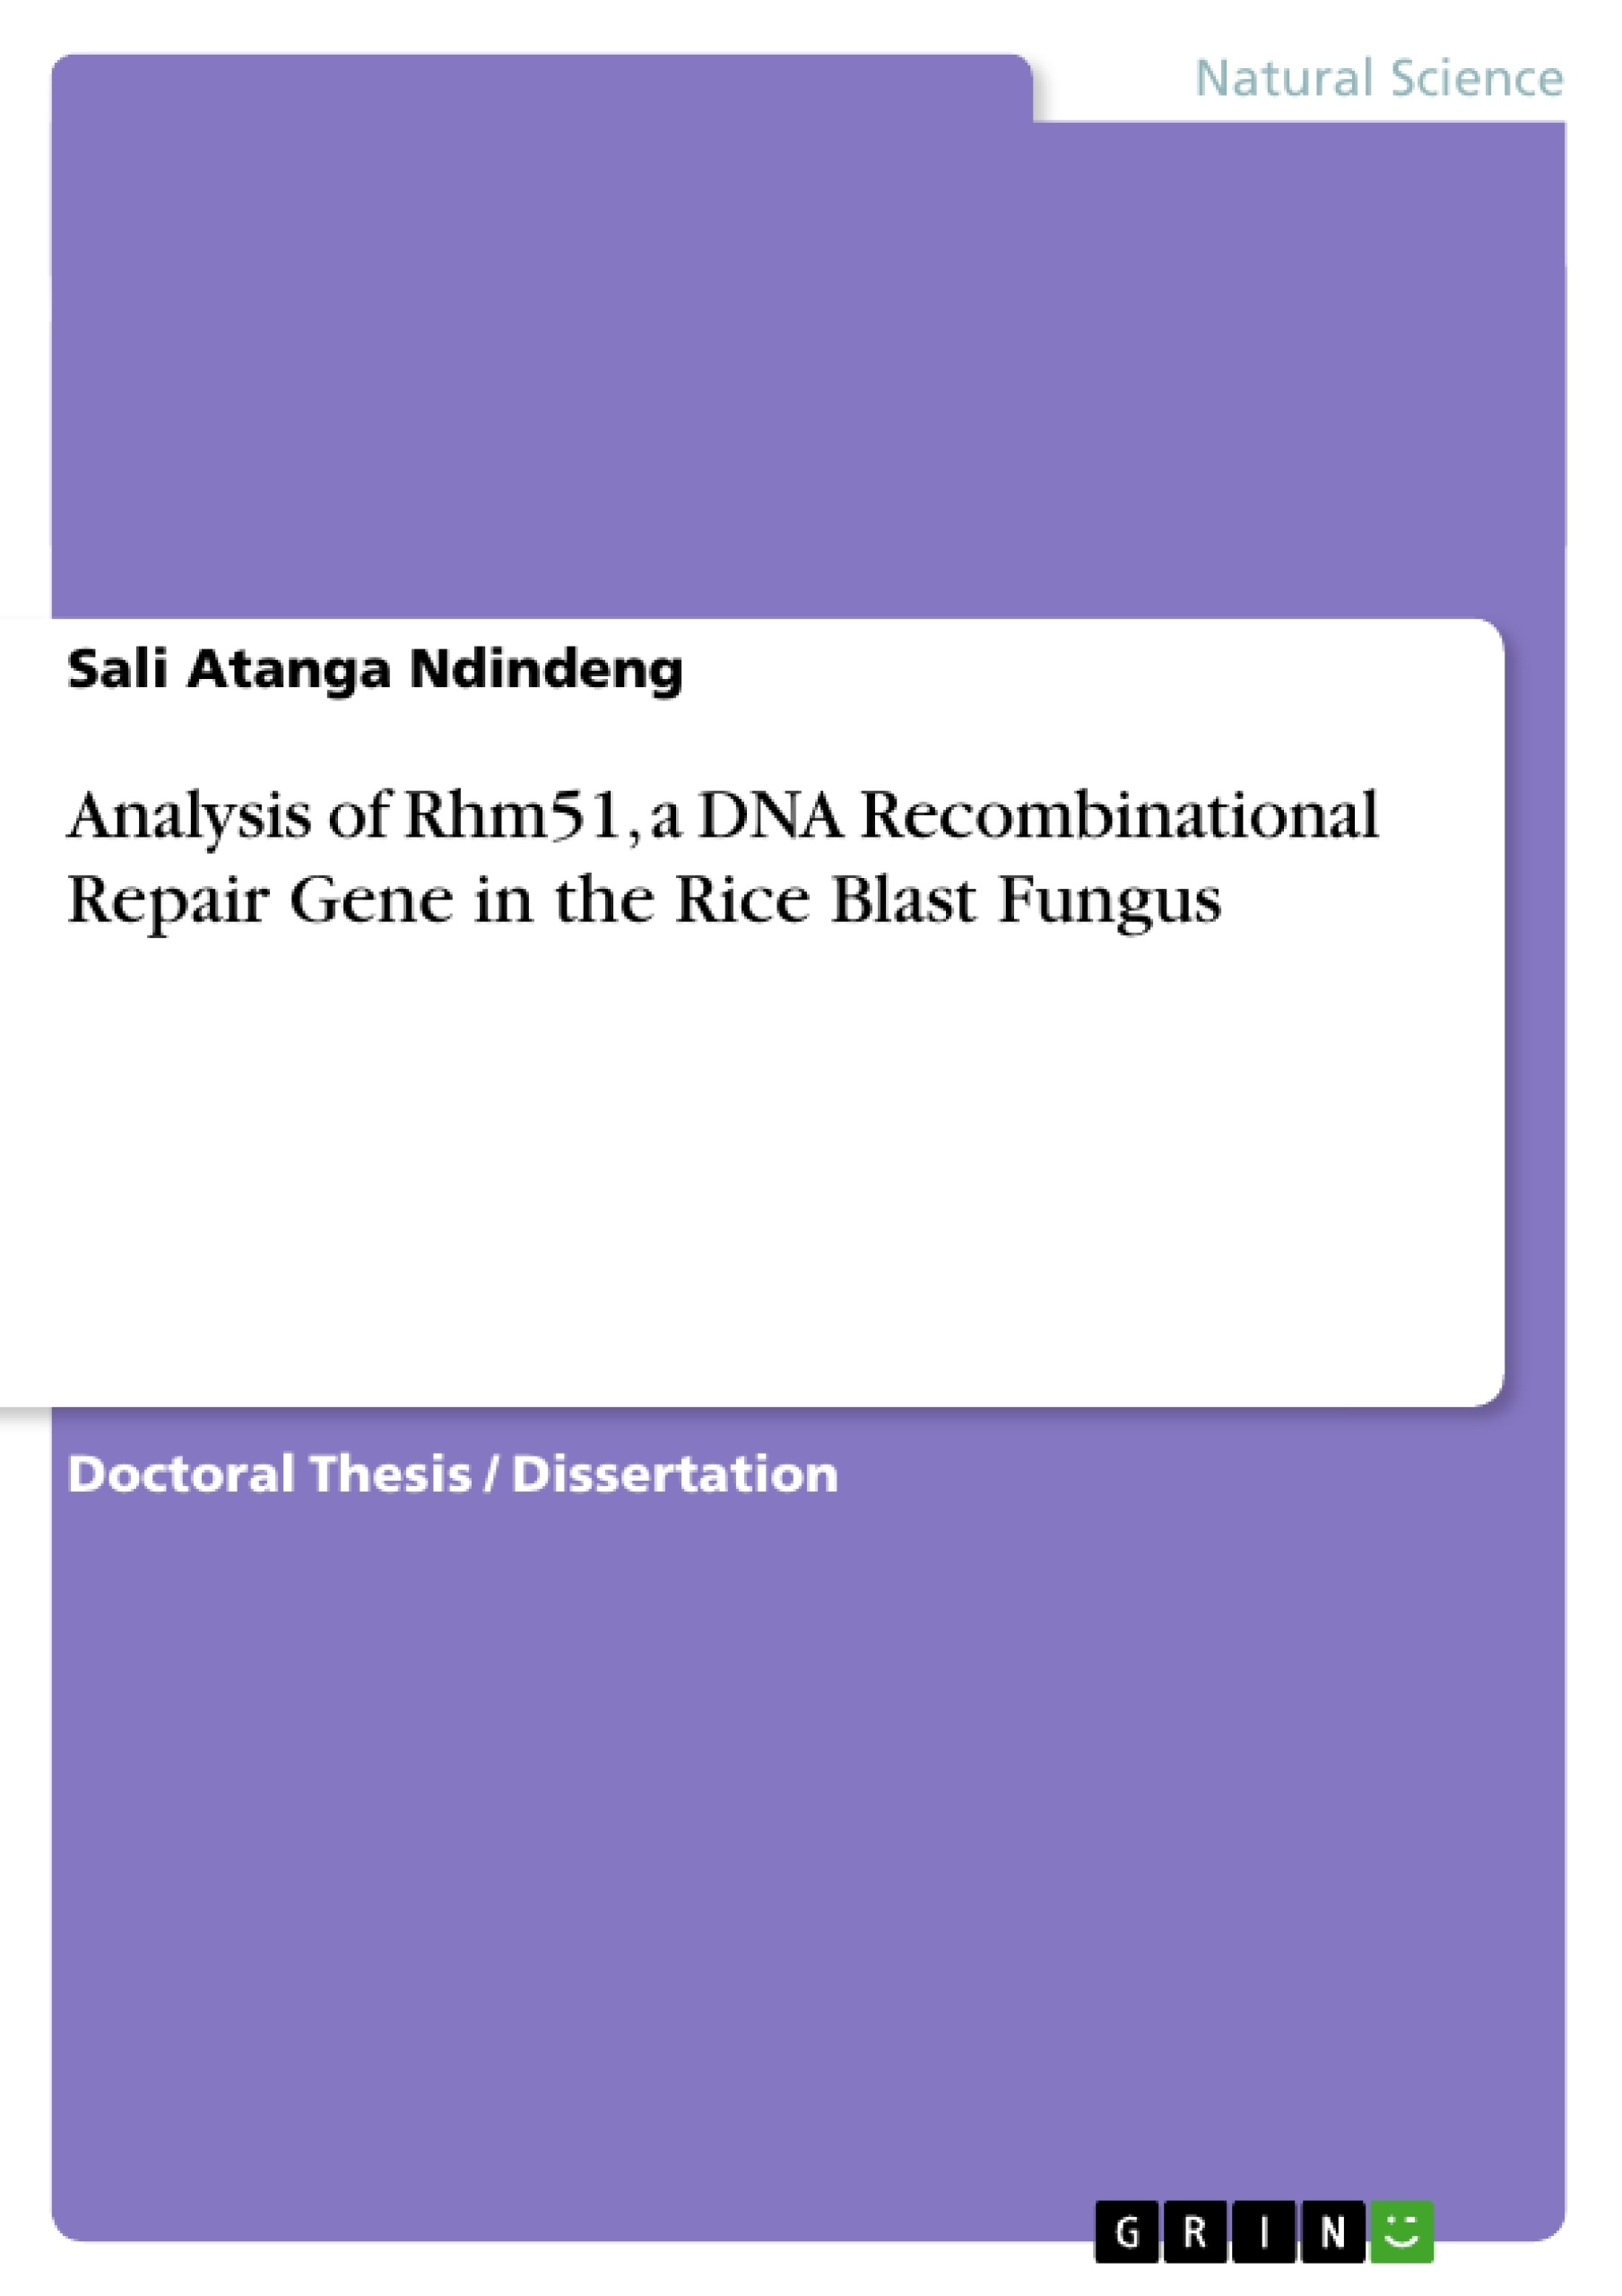 Título: Analysis of Rhm51, a DNA Recombinational Repair Gene in the  Rice Blast Fungus